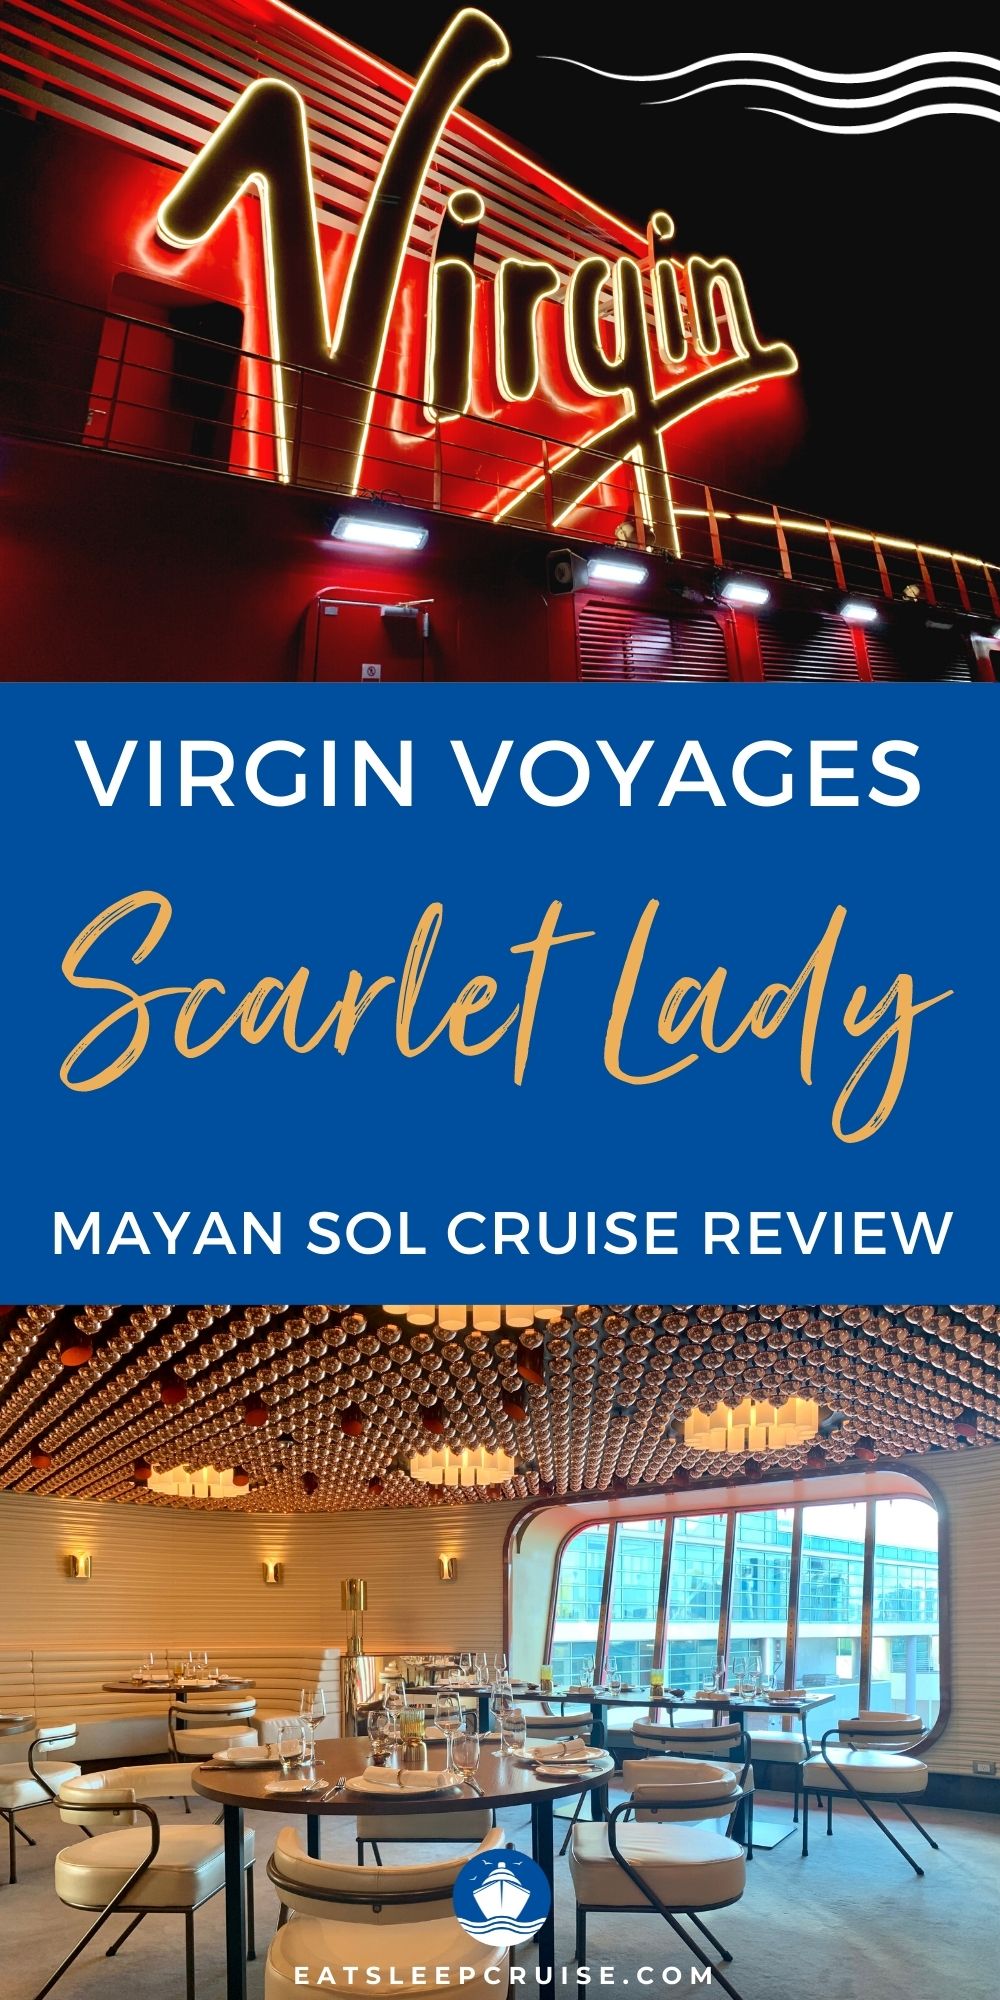 Virgin Voyages Scarlet Lady Mayan Sol Cruise Review